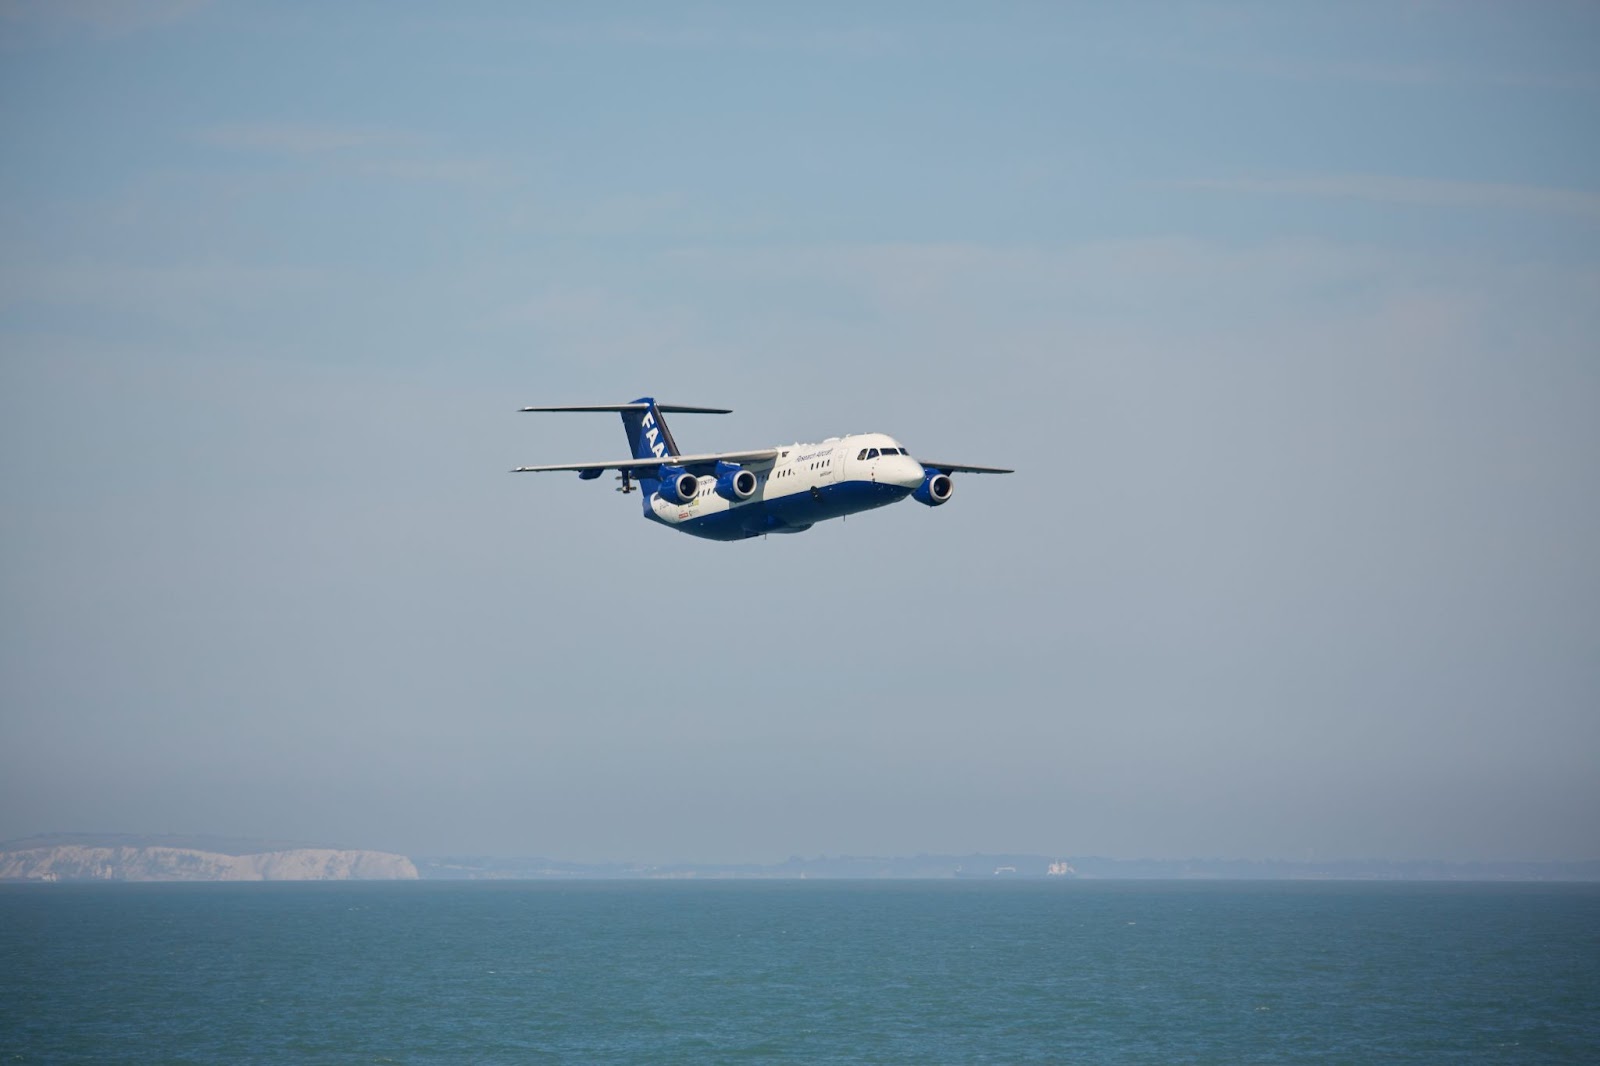 A large blue and white research aircraft flying low over the sea. White cliffs are visible on the horizon.